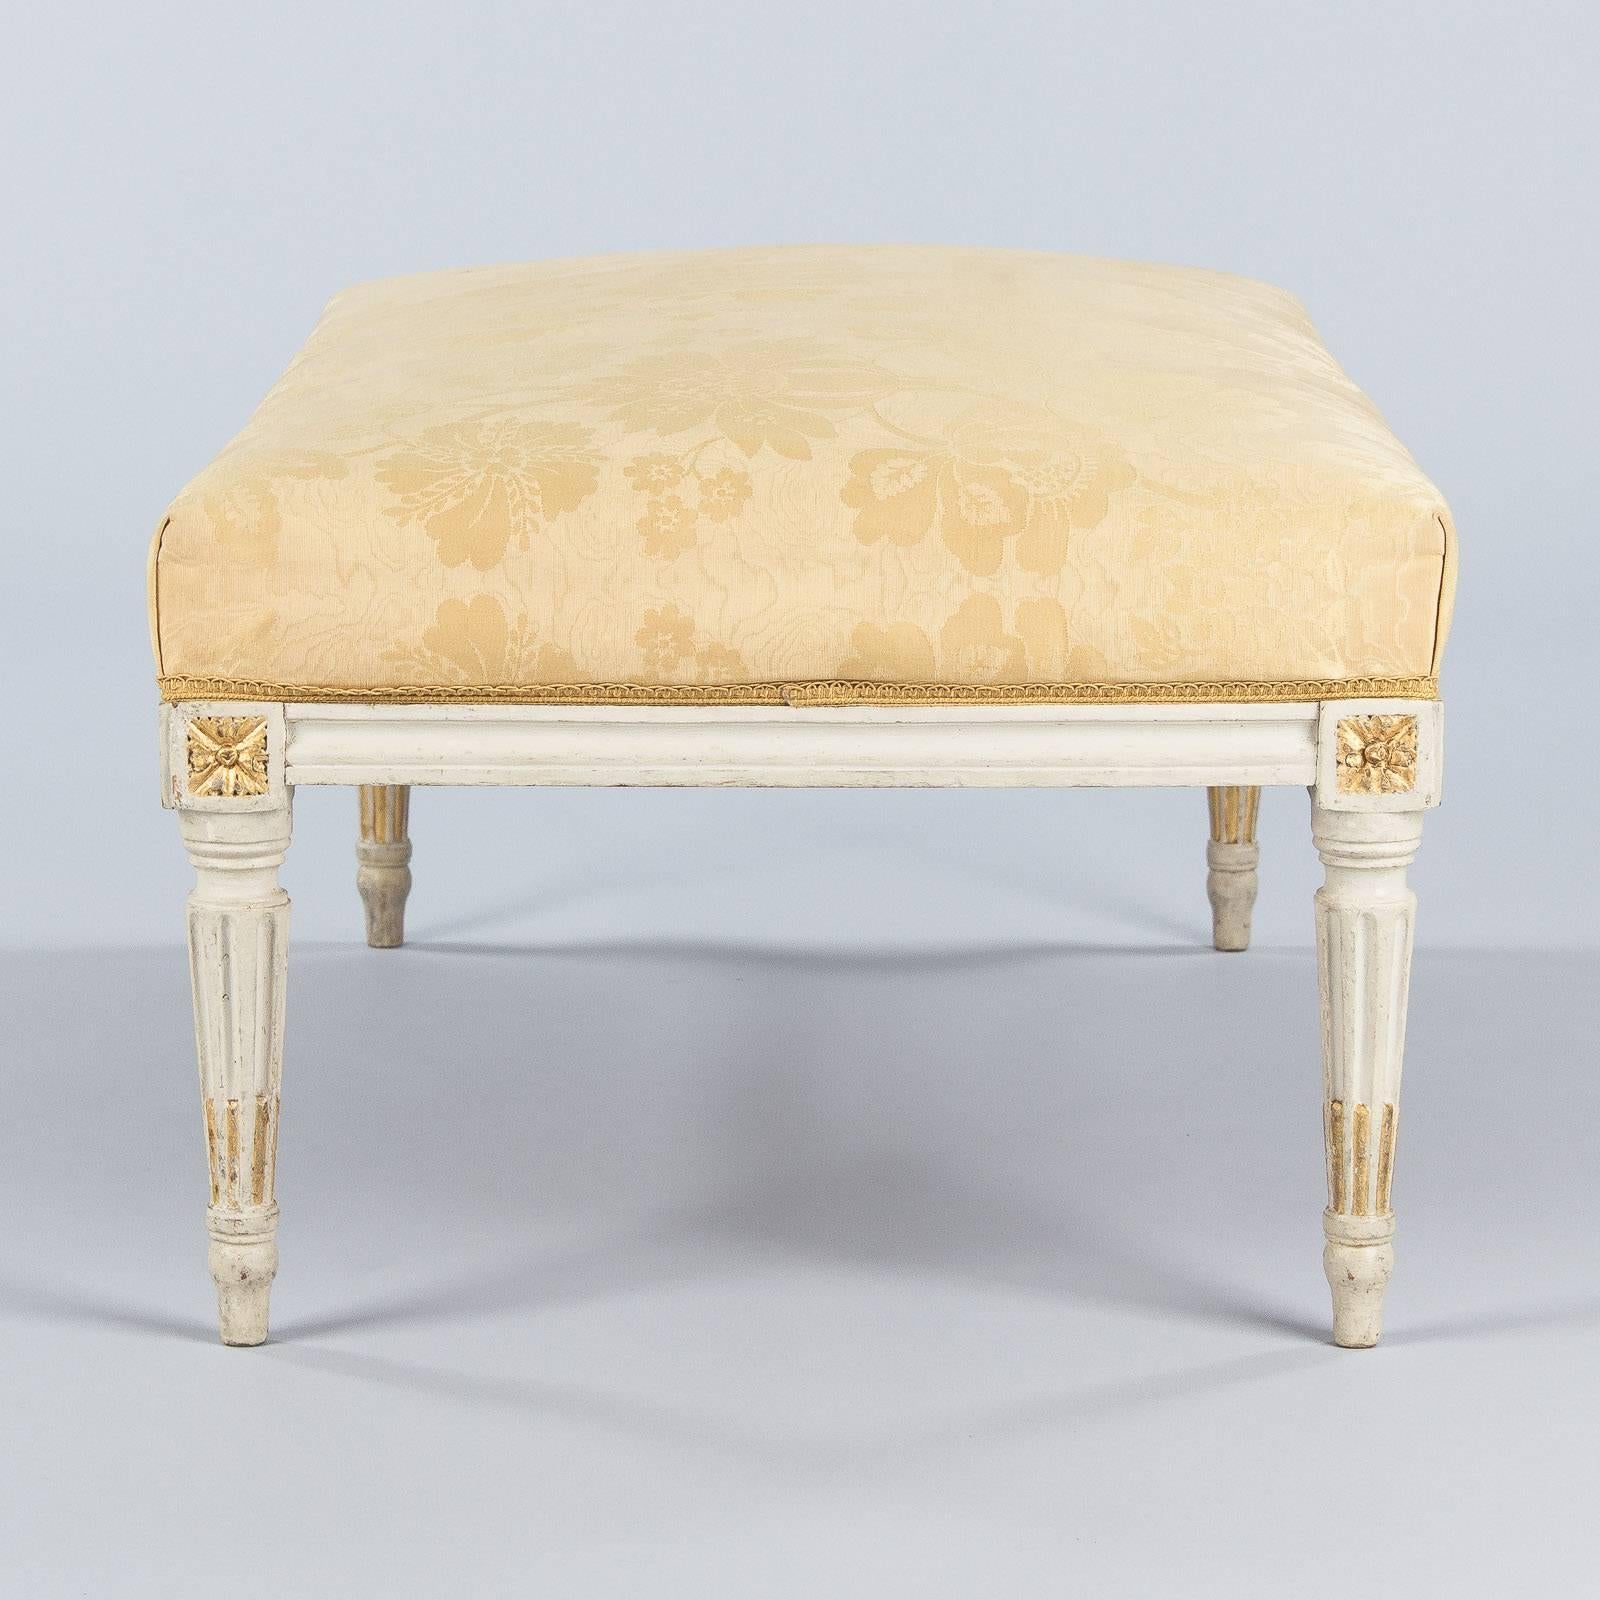 French Louis XVI Style Upholstered Painted Ottoman, Early 1900s